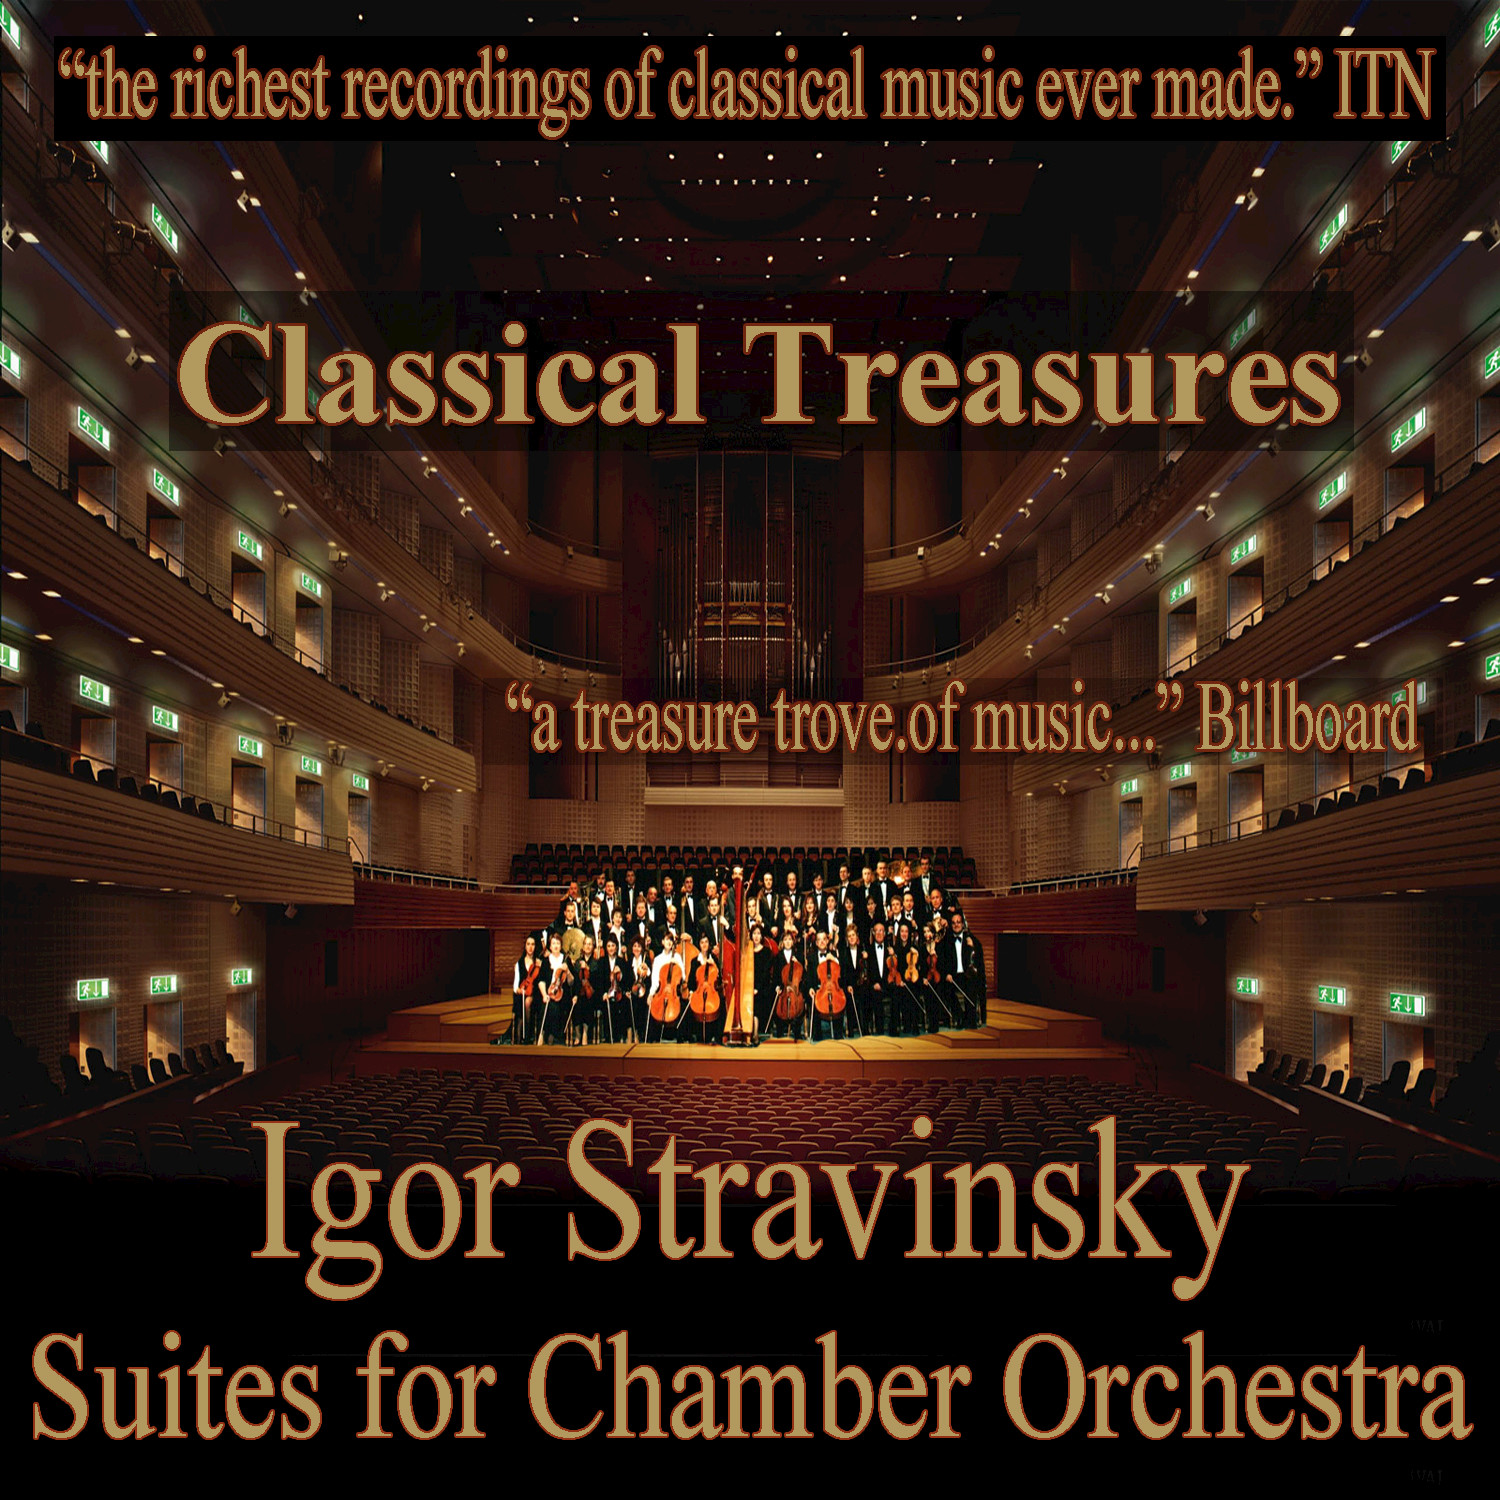 Stravinsky: Suites for Chamber Orchestra